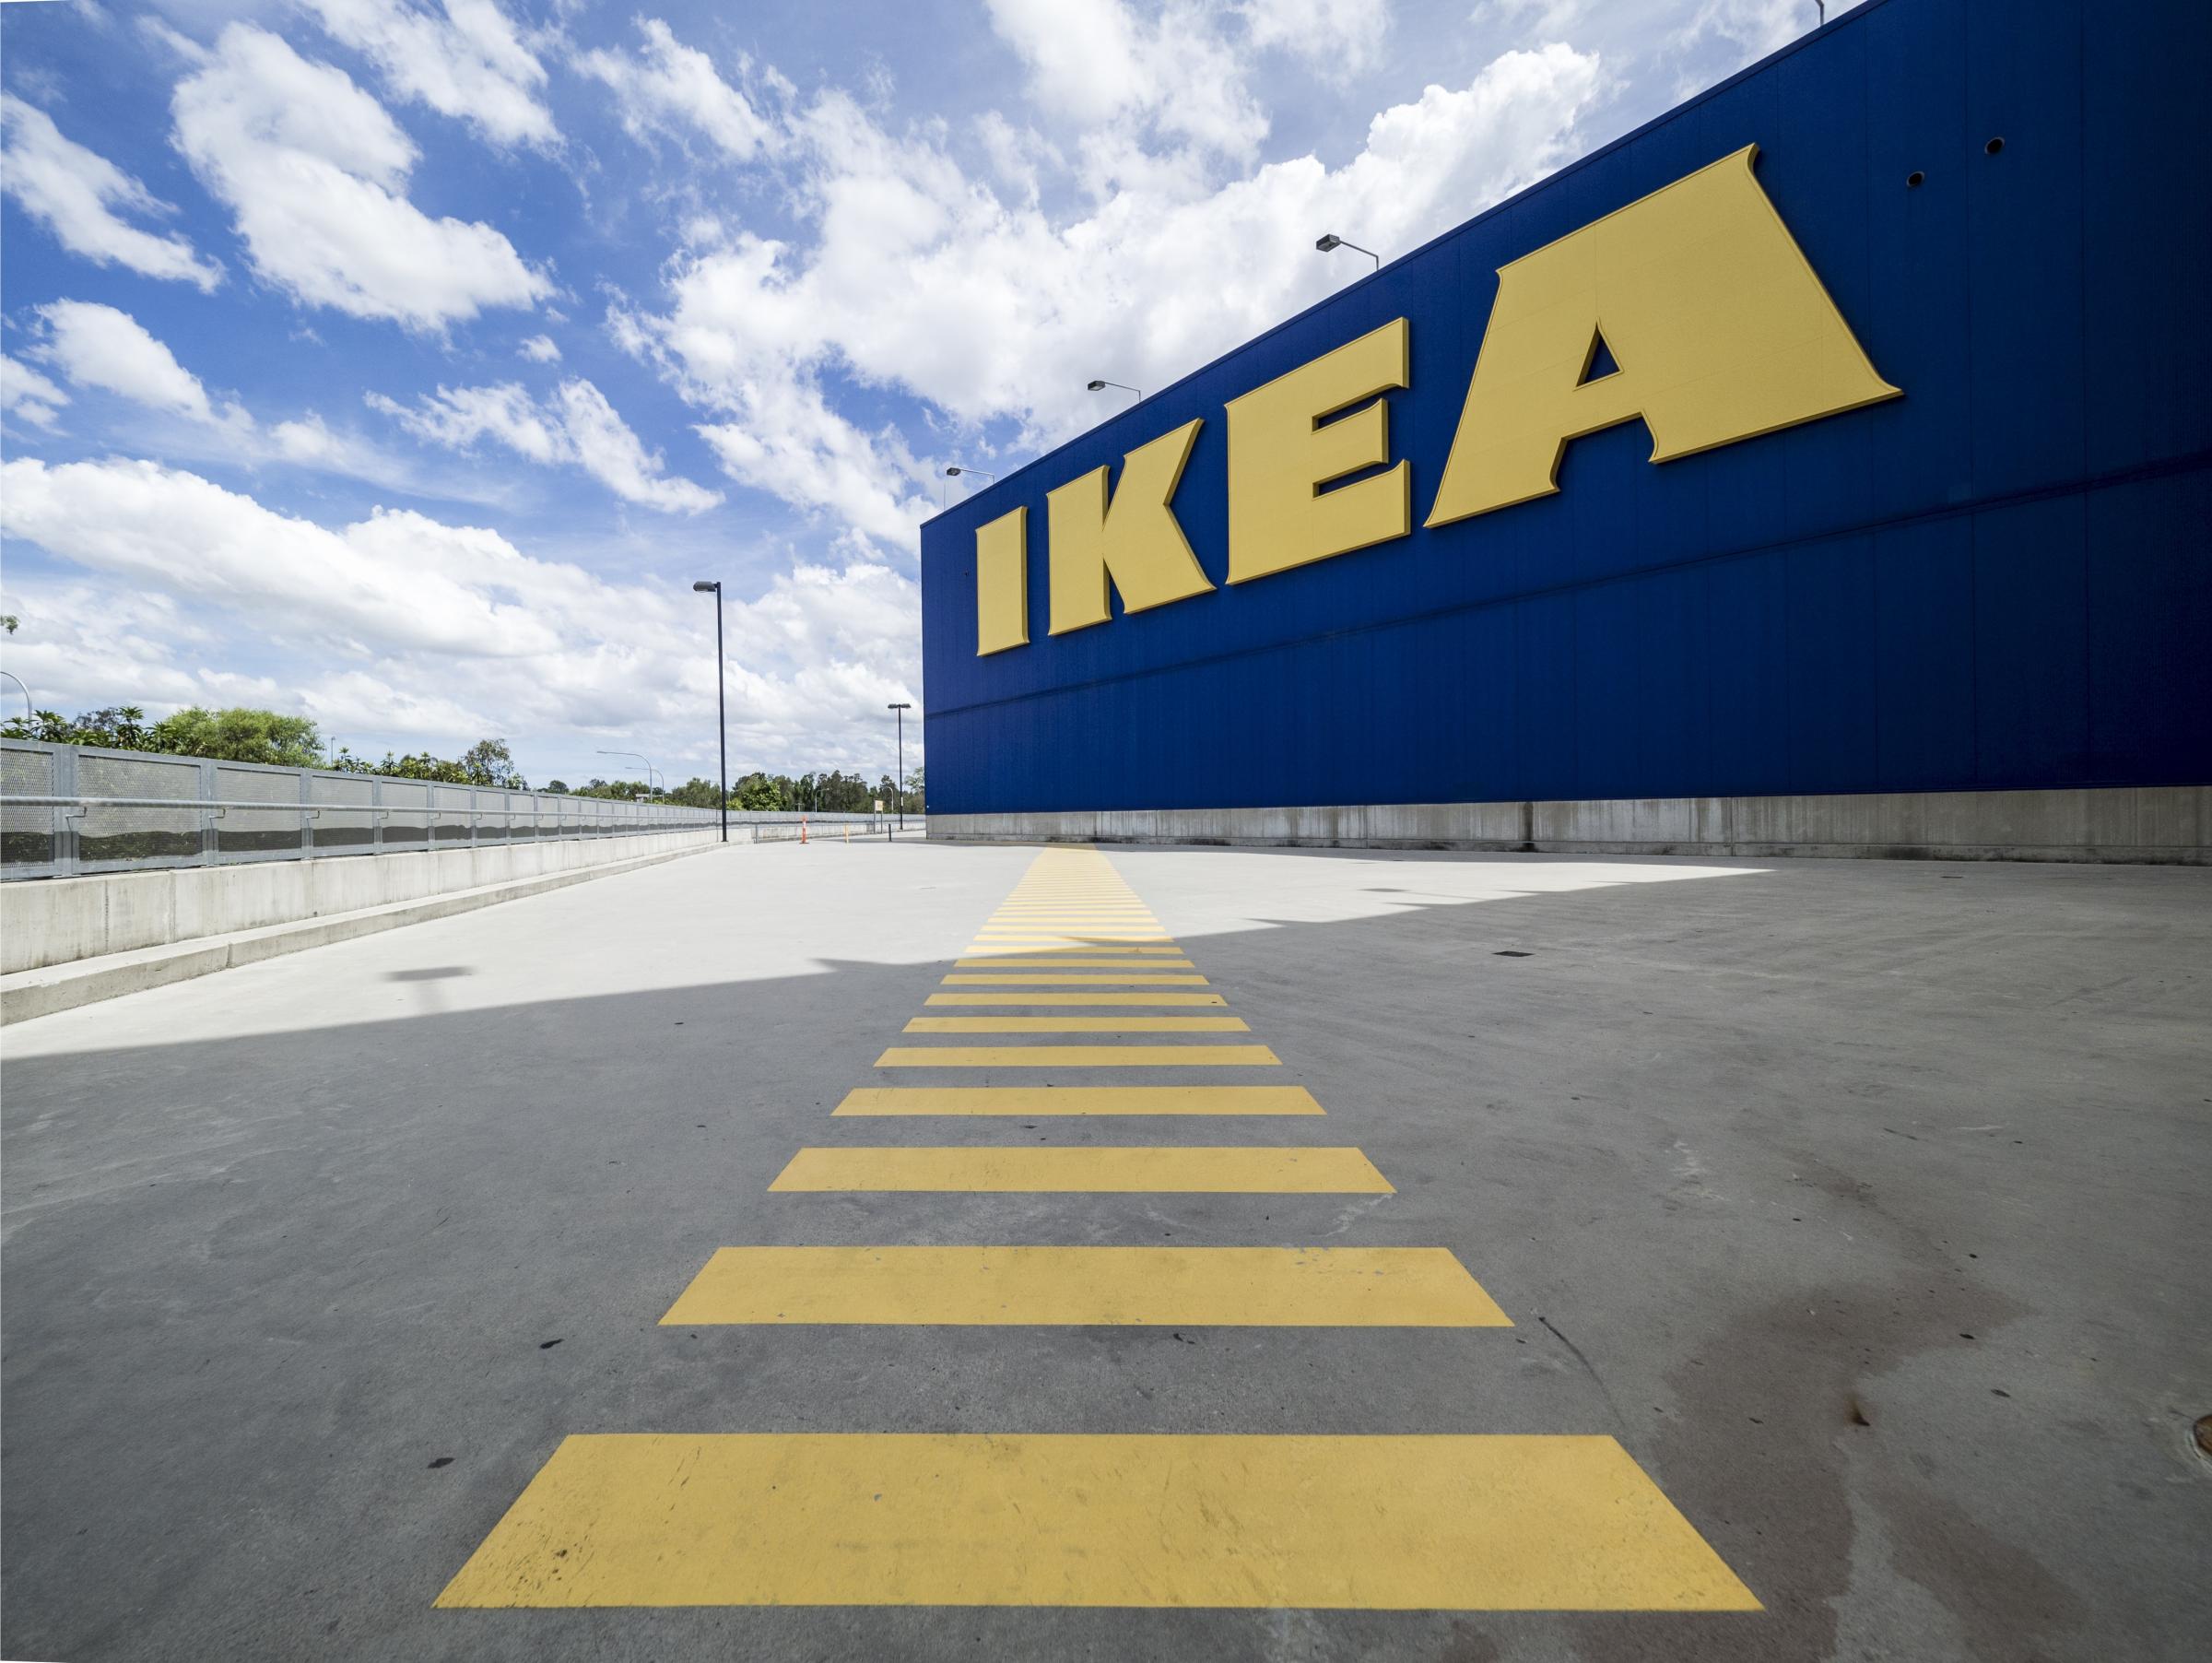 Brett Ellis says the Ikea shopping experience has not changed since he last went a decade ago. Photos: Pixabay